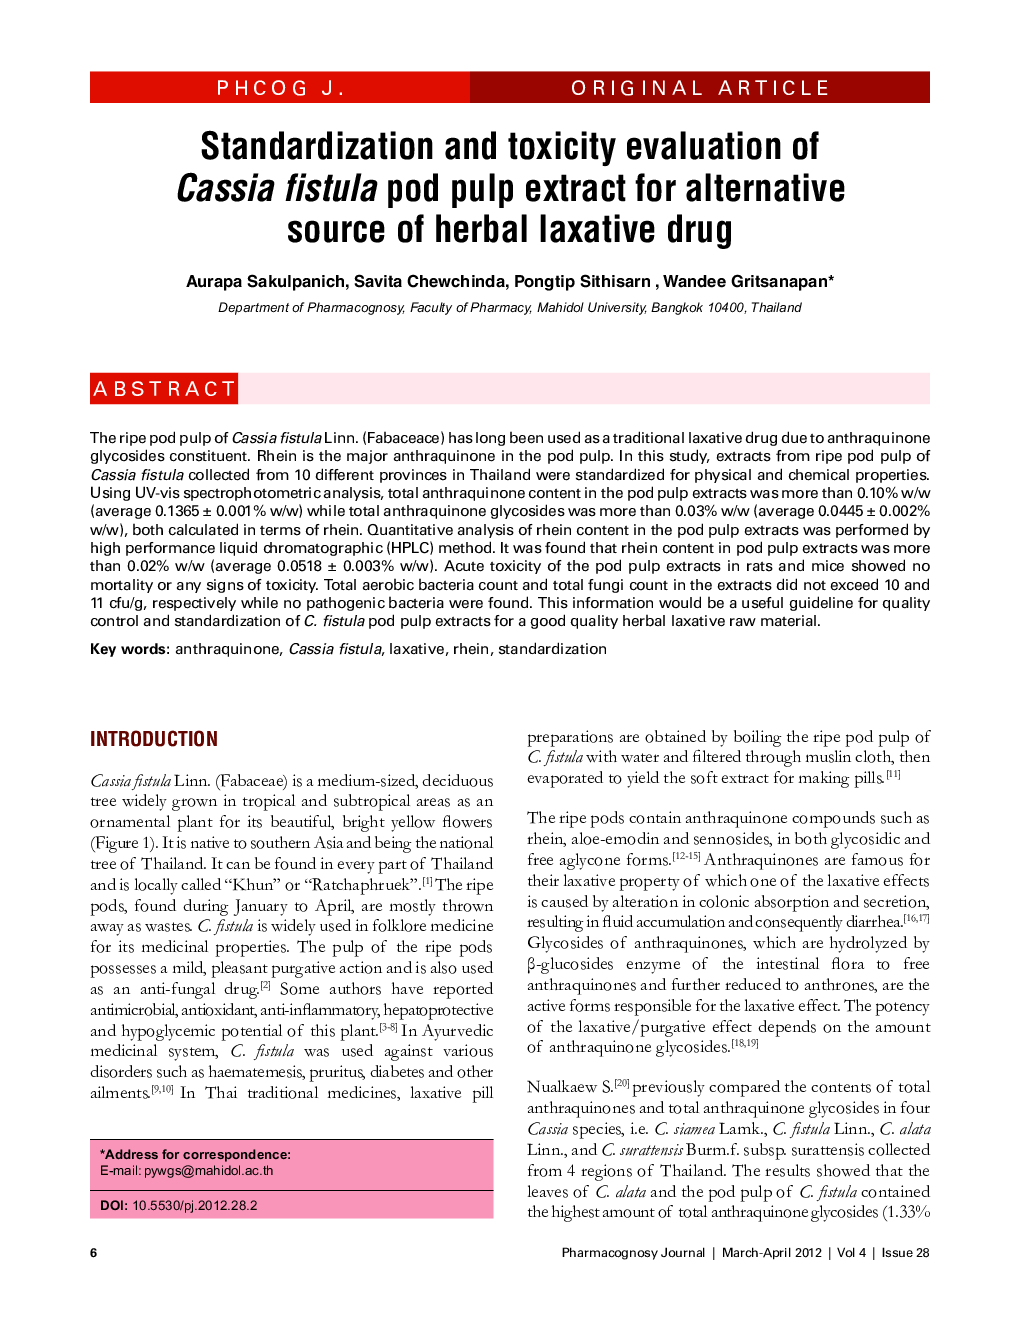 Standardization and toxicity evaluation of Cassia fistula pod pulp extract for alternative source of herbal laxative drug